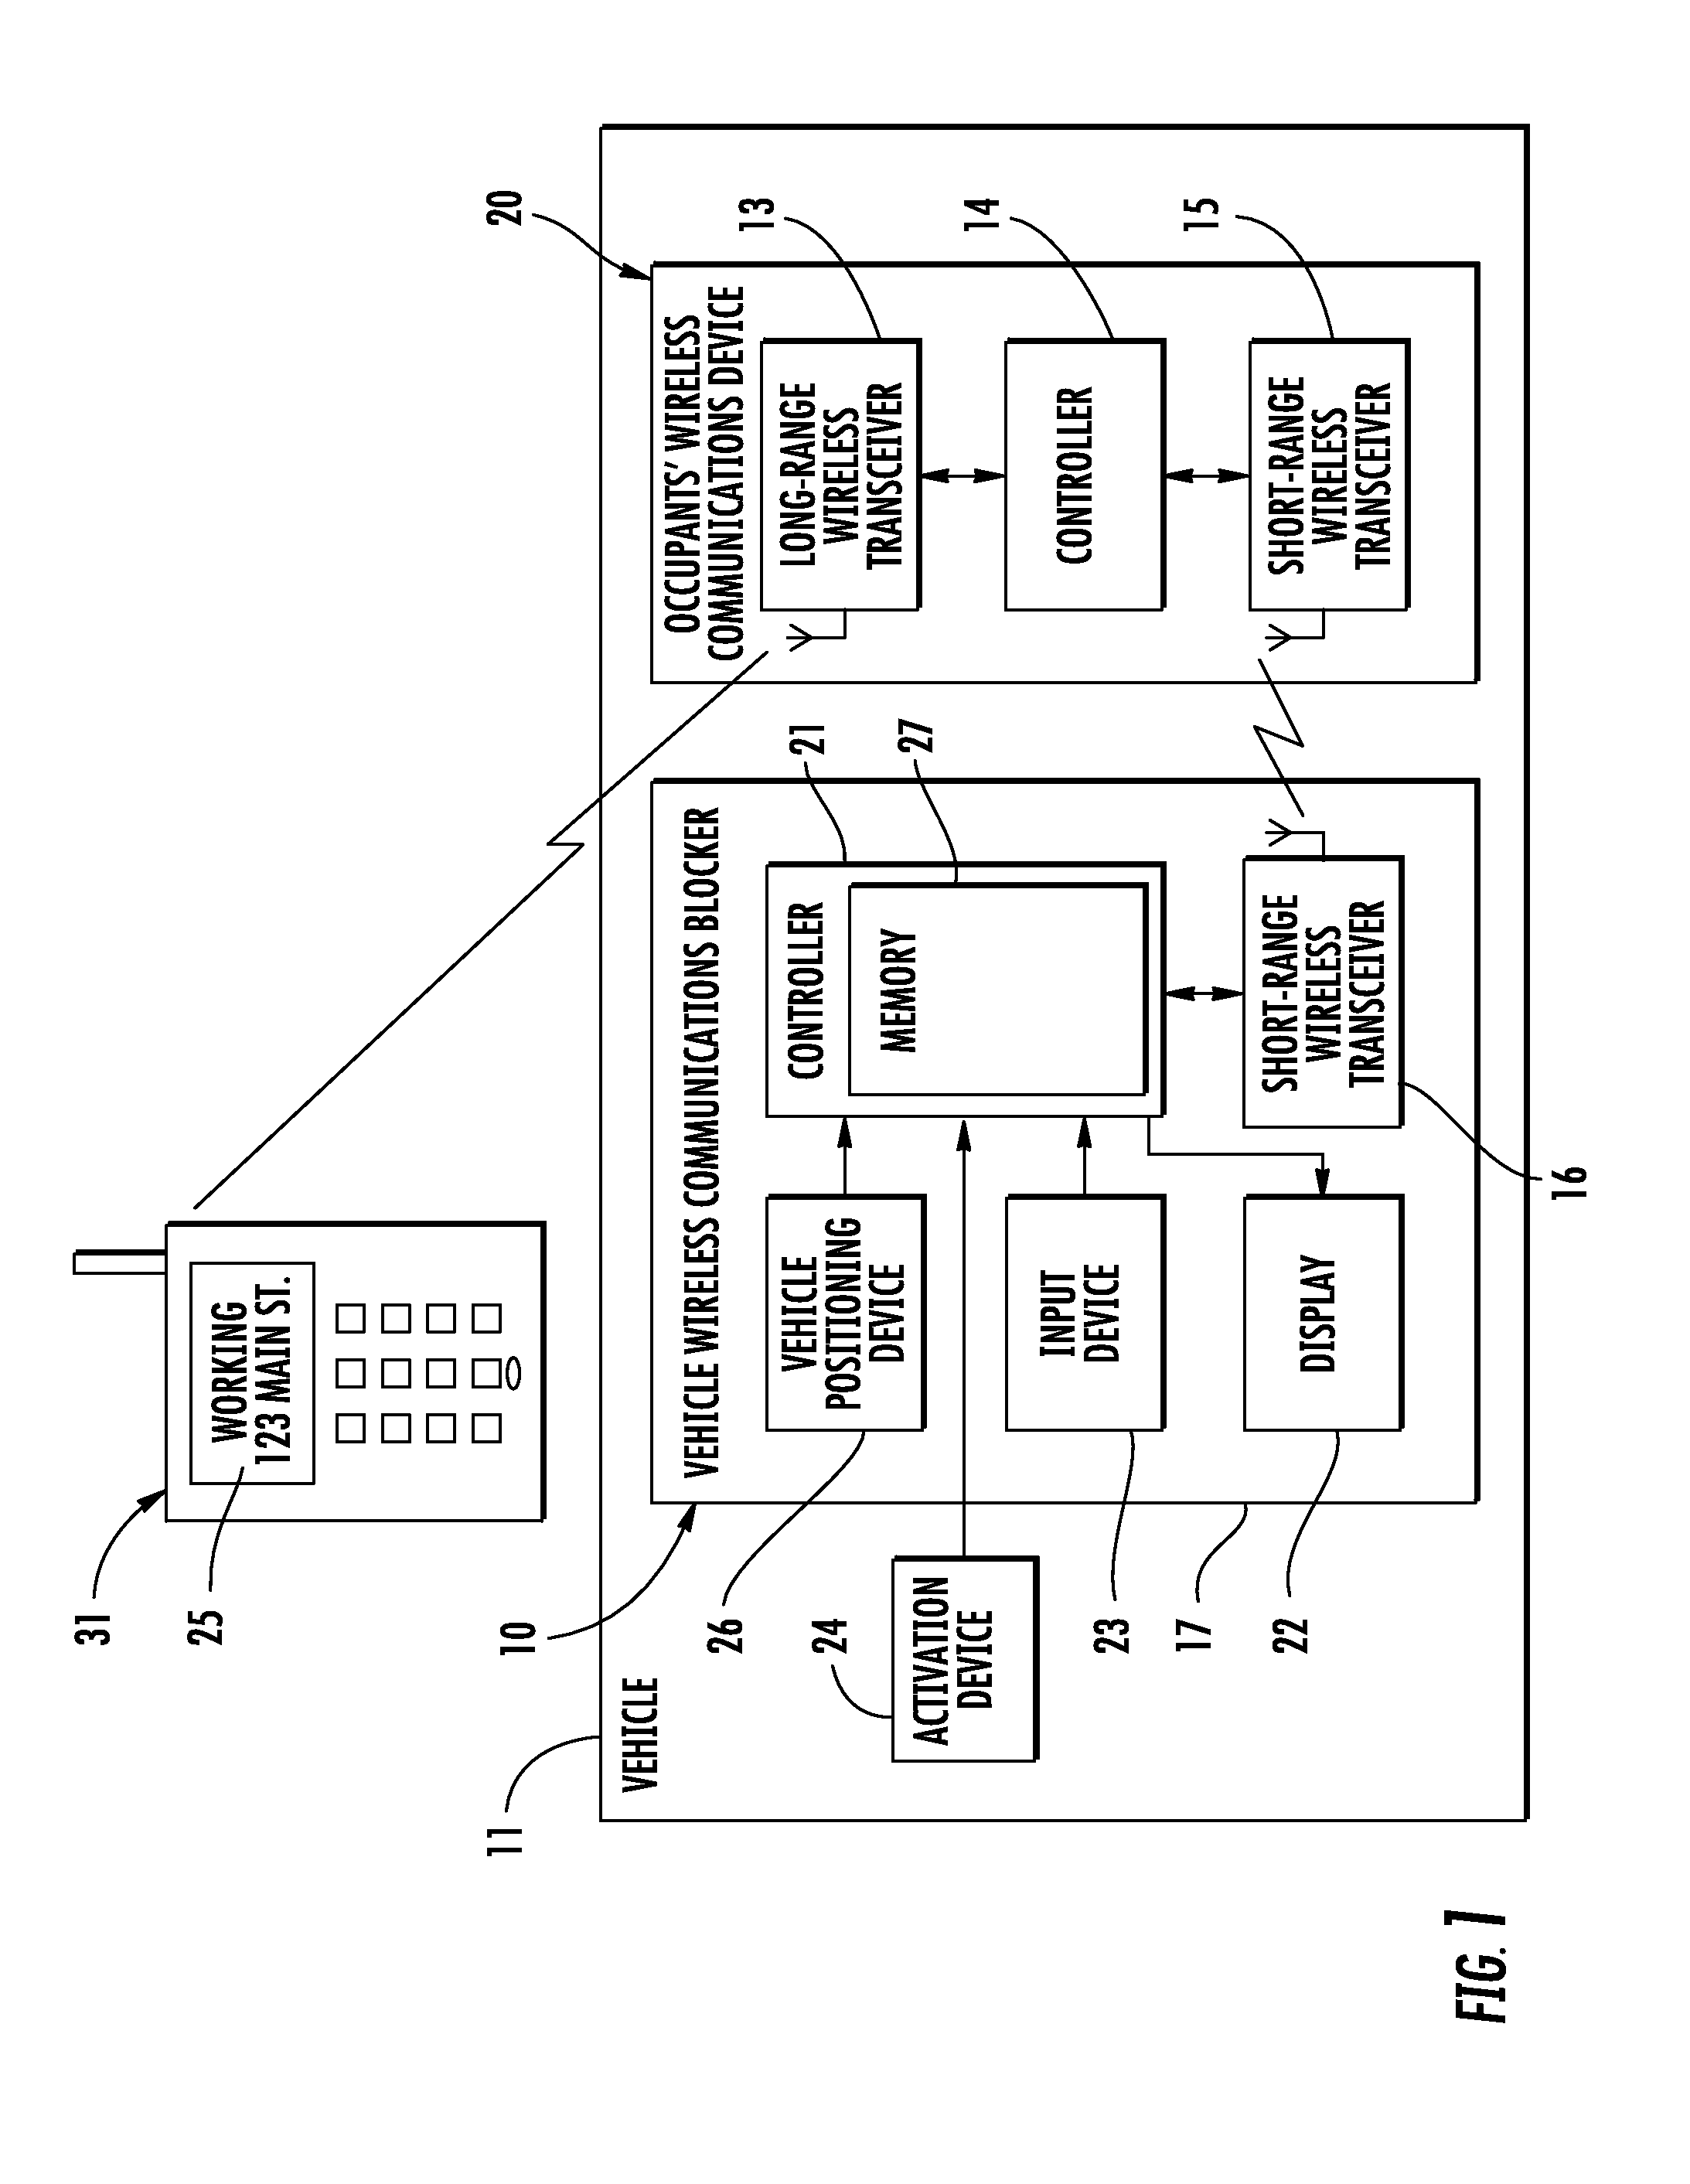 Mobile wireless communications device blocker and associated methods